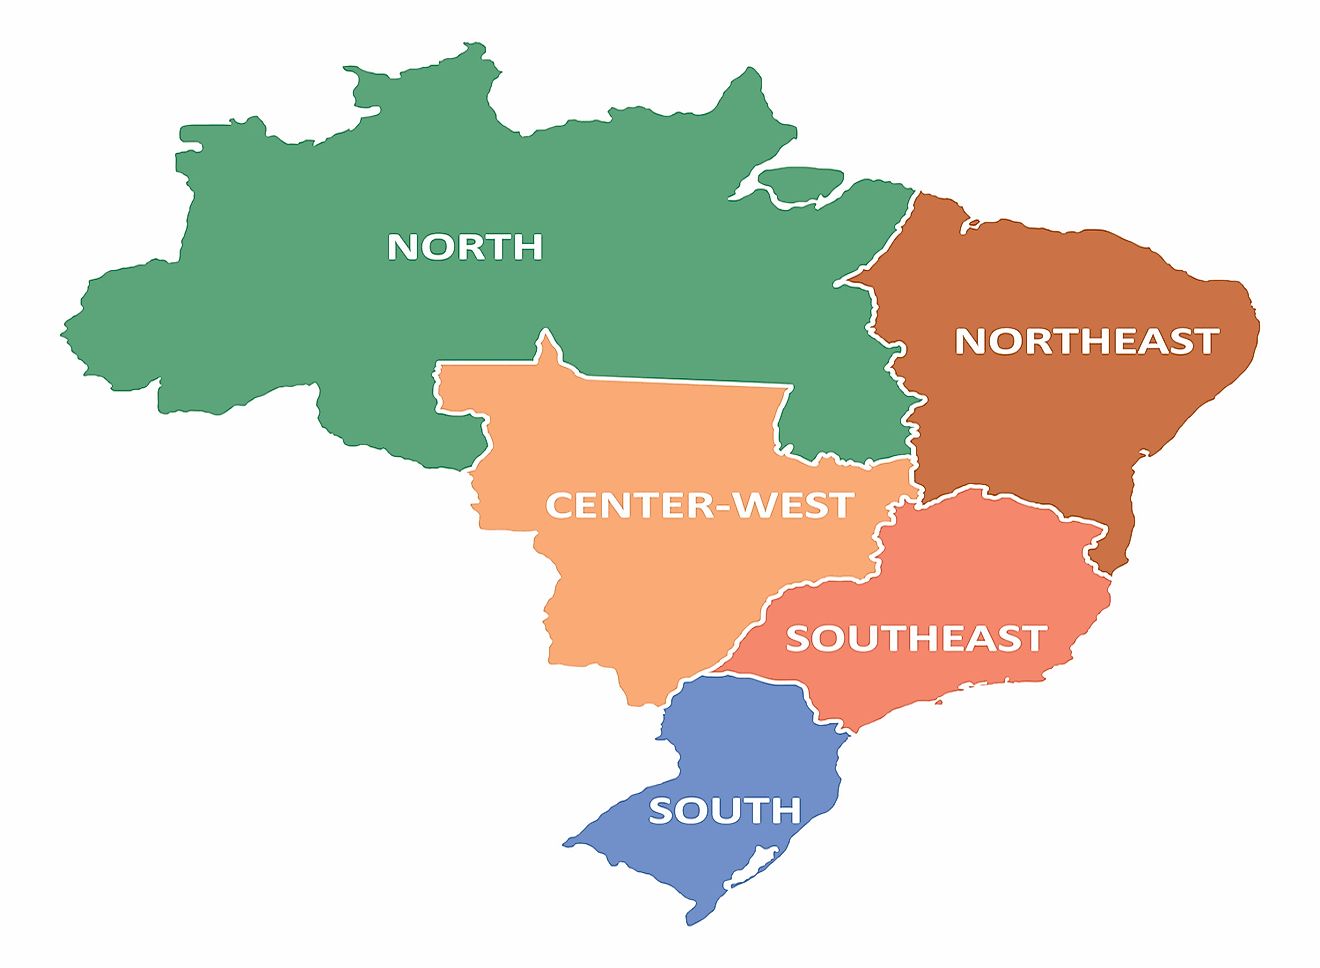 A map showing the five regions of Brazil. Image credit: Luisrftc/Shutterstock.com